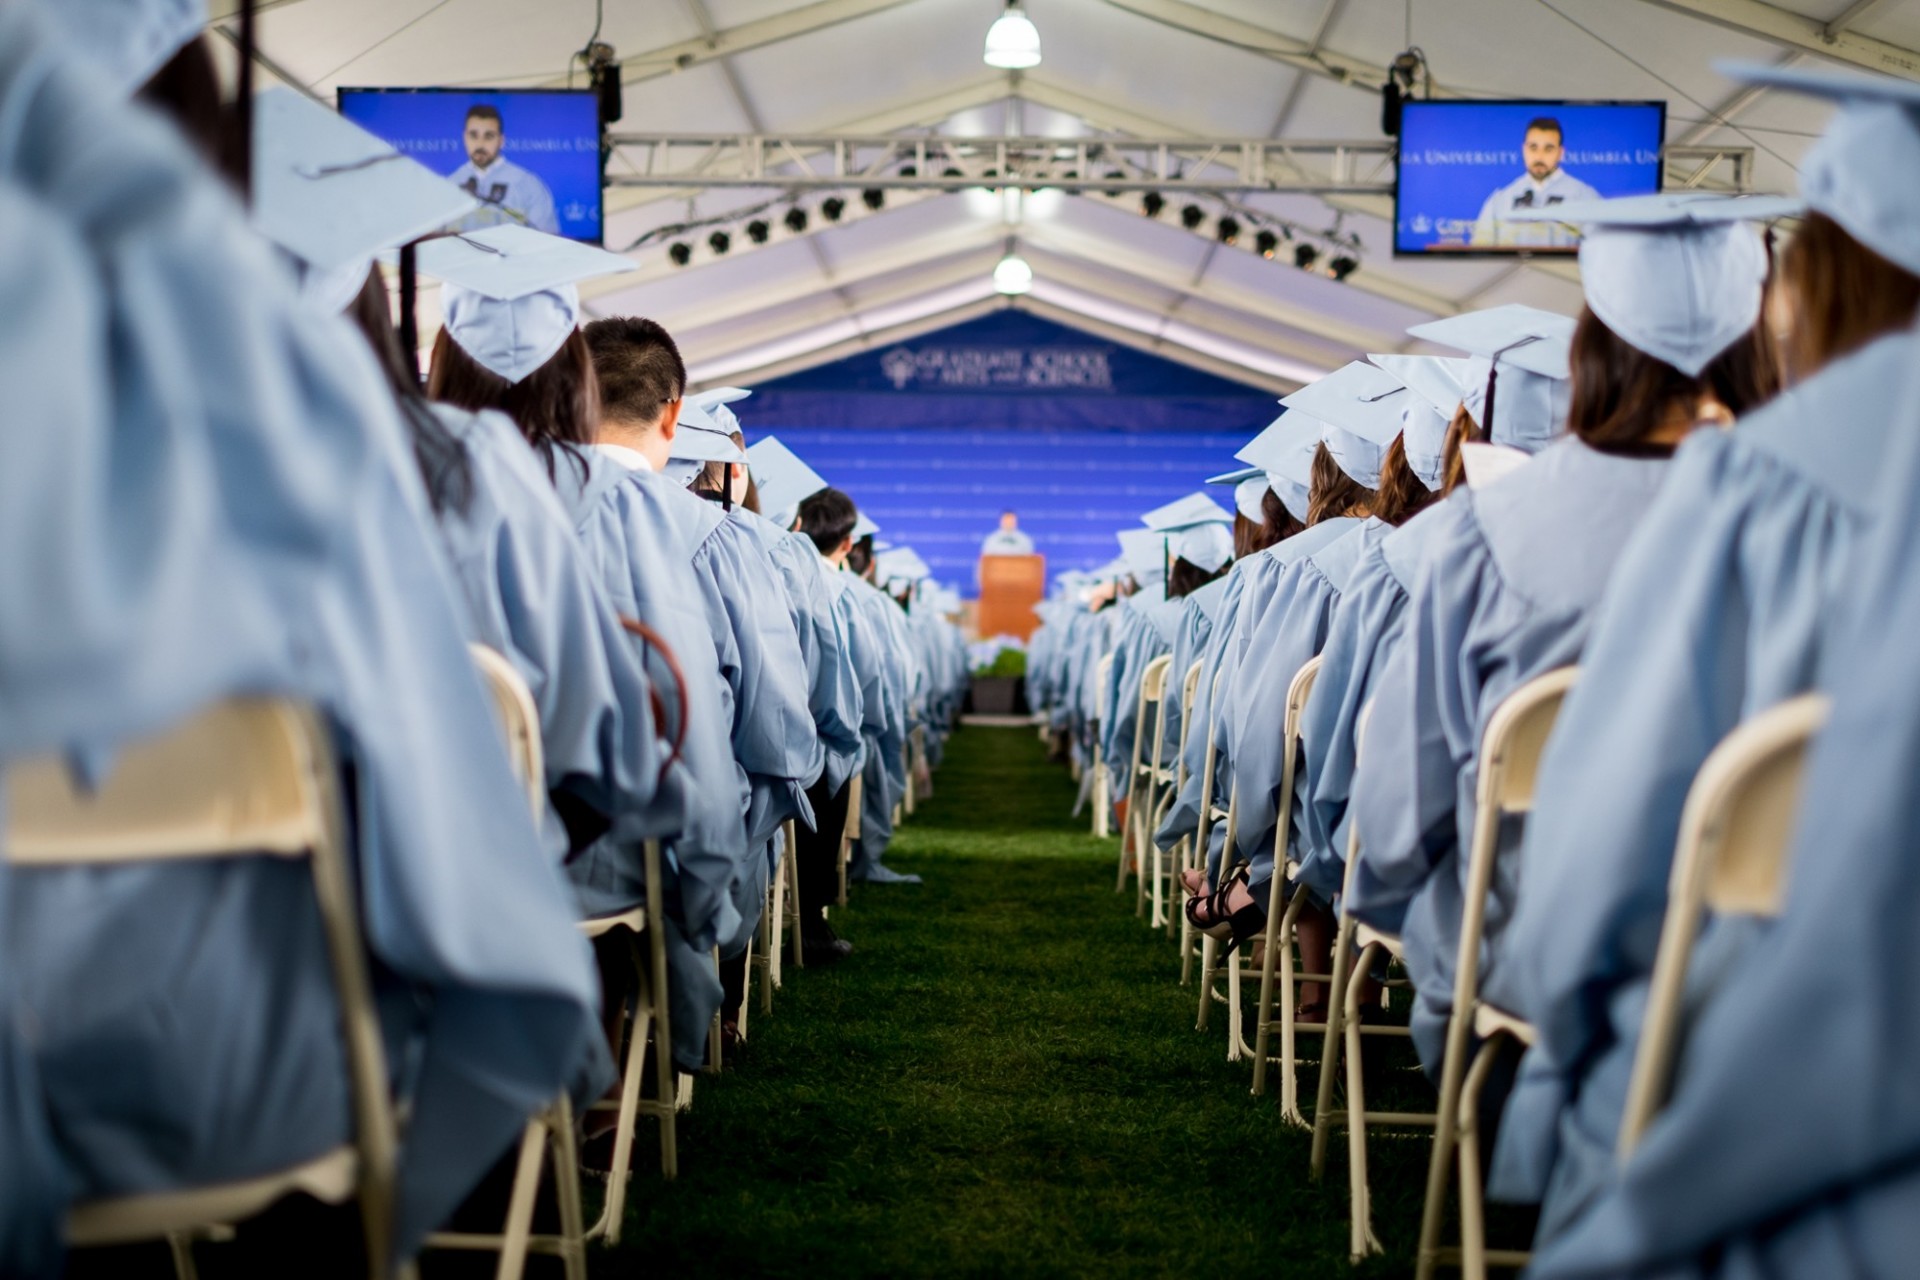 MA student speaker Ediz Ozelkan shares what he has learned from Columbia and New York.